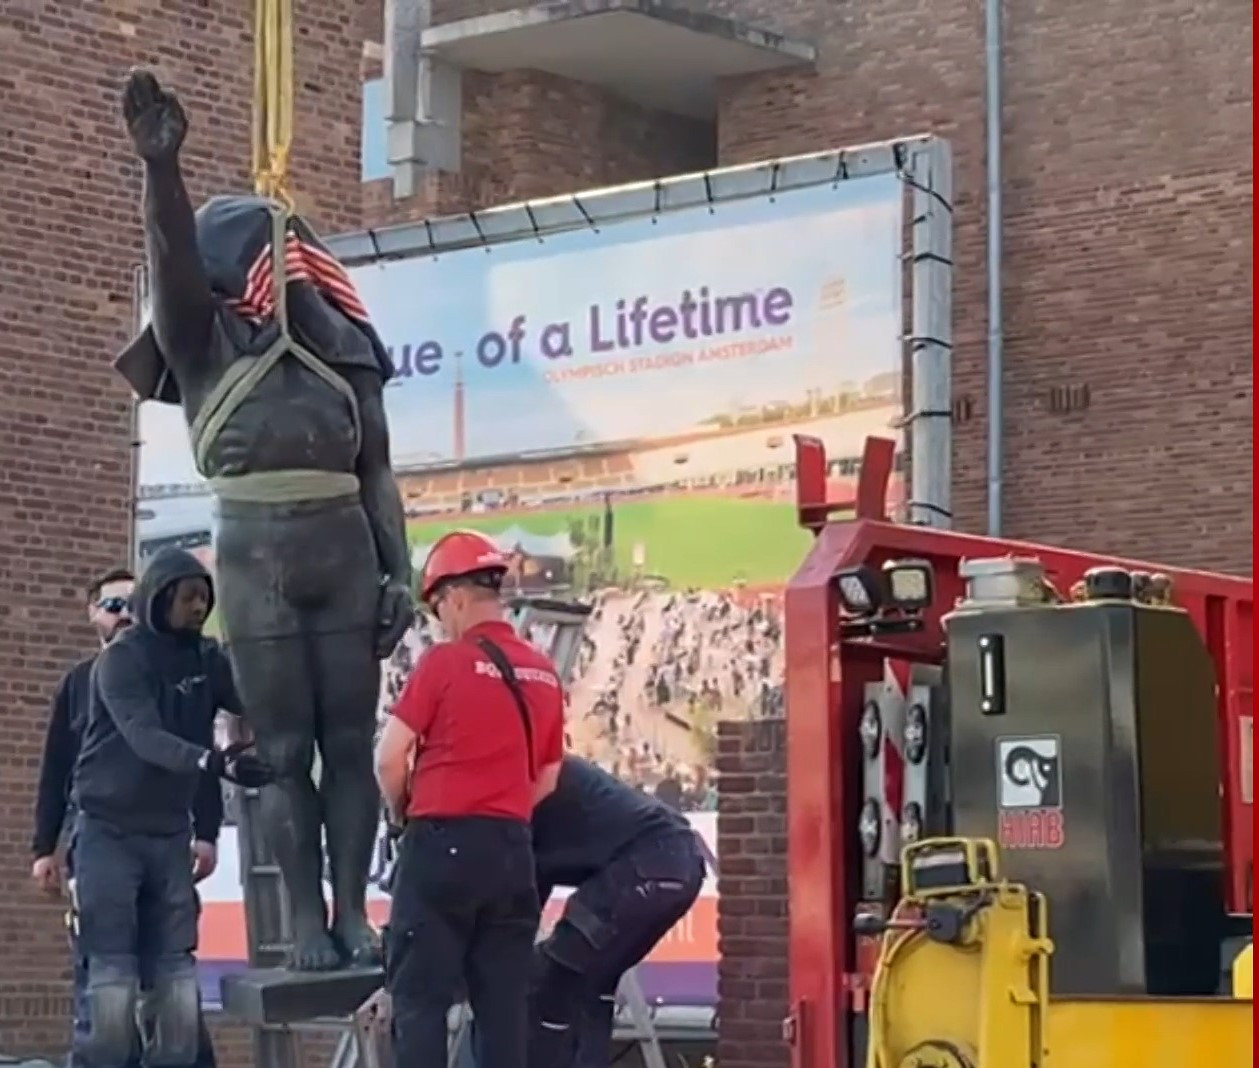 The controversial statue was removed from outside the Olympic Stadium in Amsterdam in March and removed to a new place inside where it is less visible to the public ©AT5